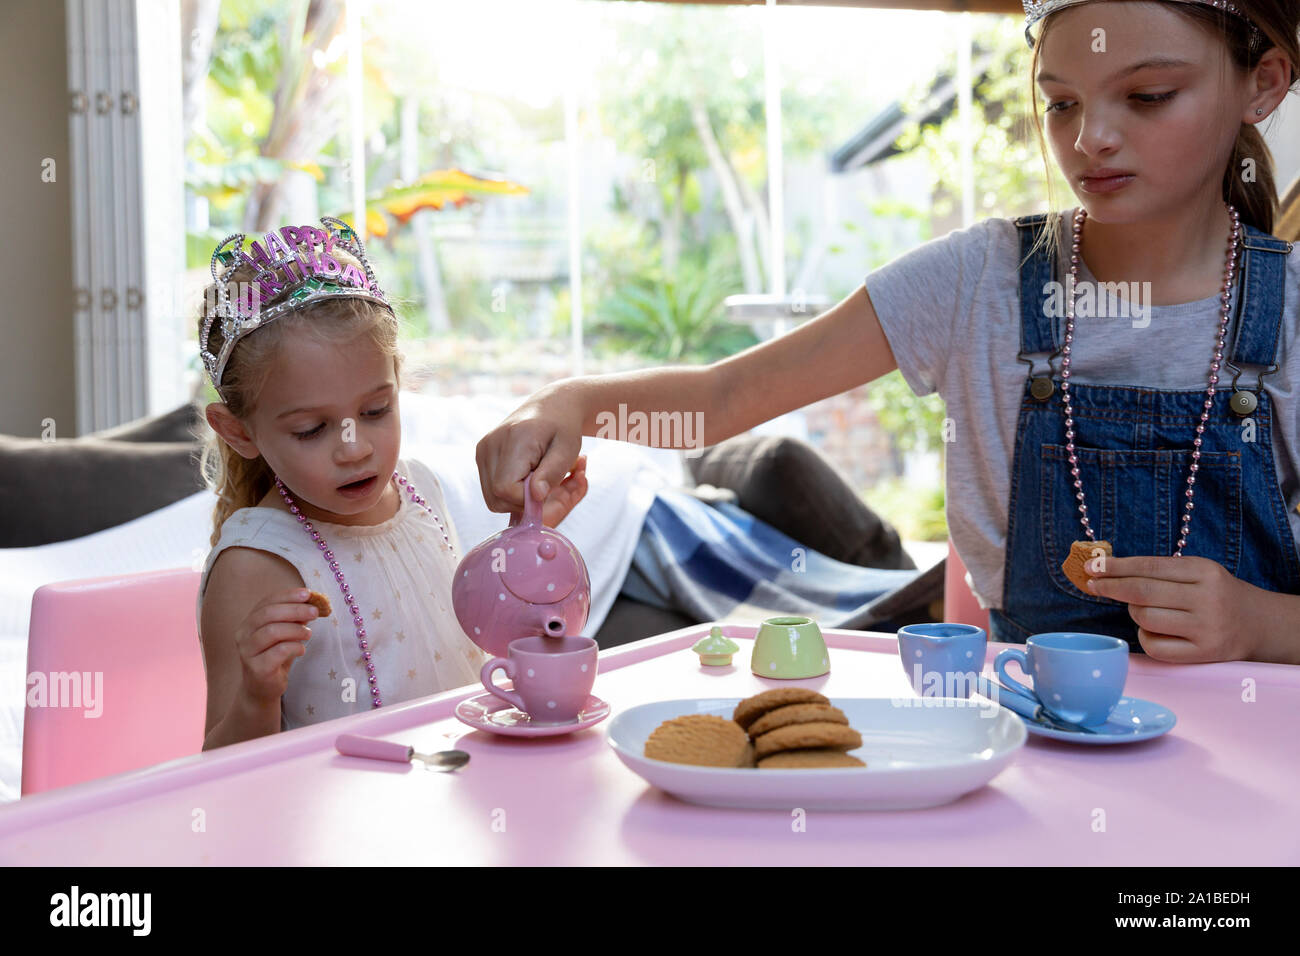 Young girls enjoying time at home Stock Photo